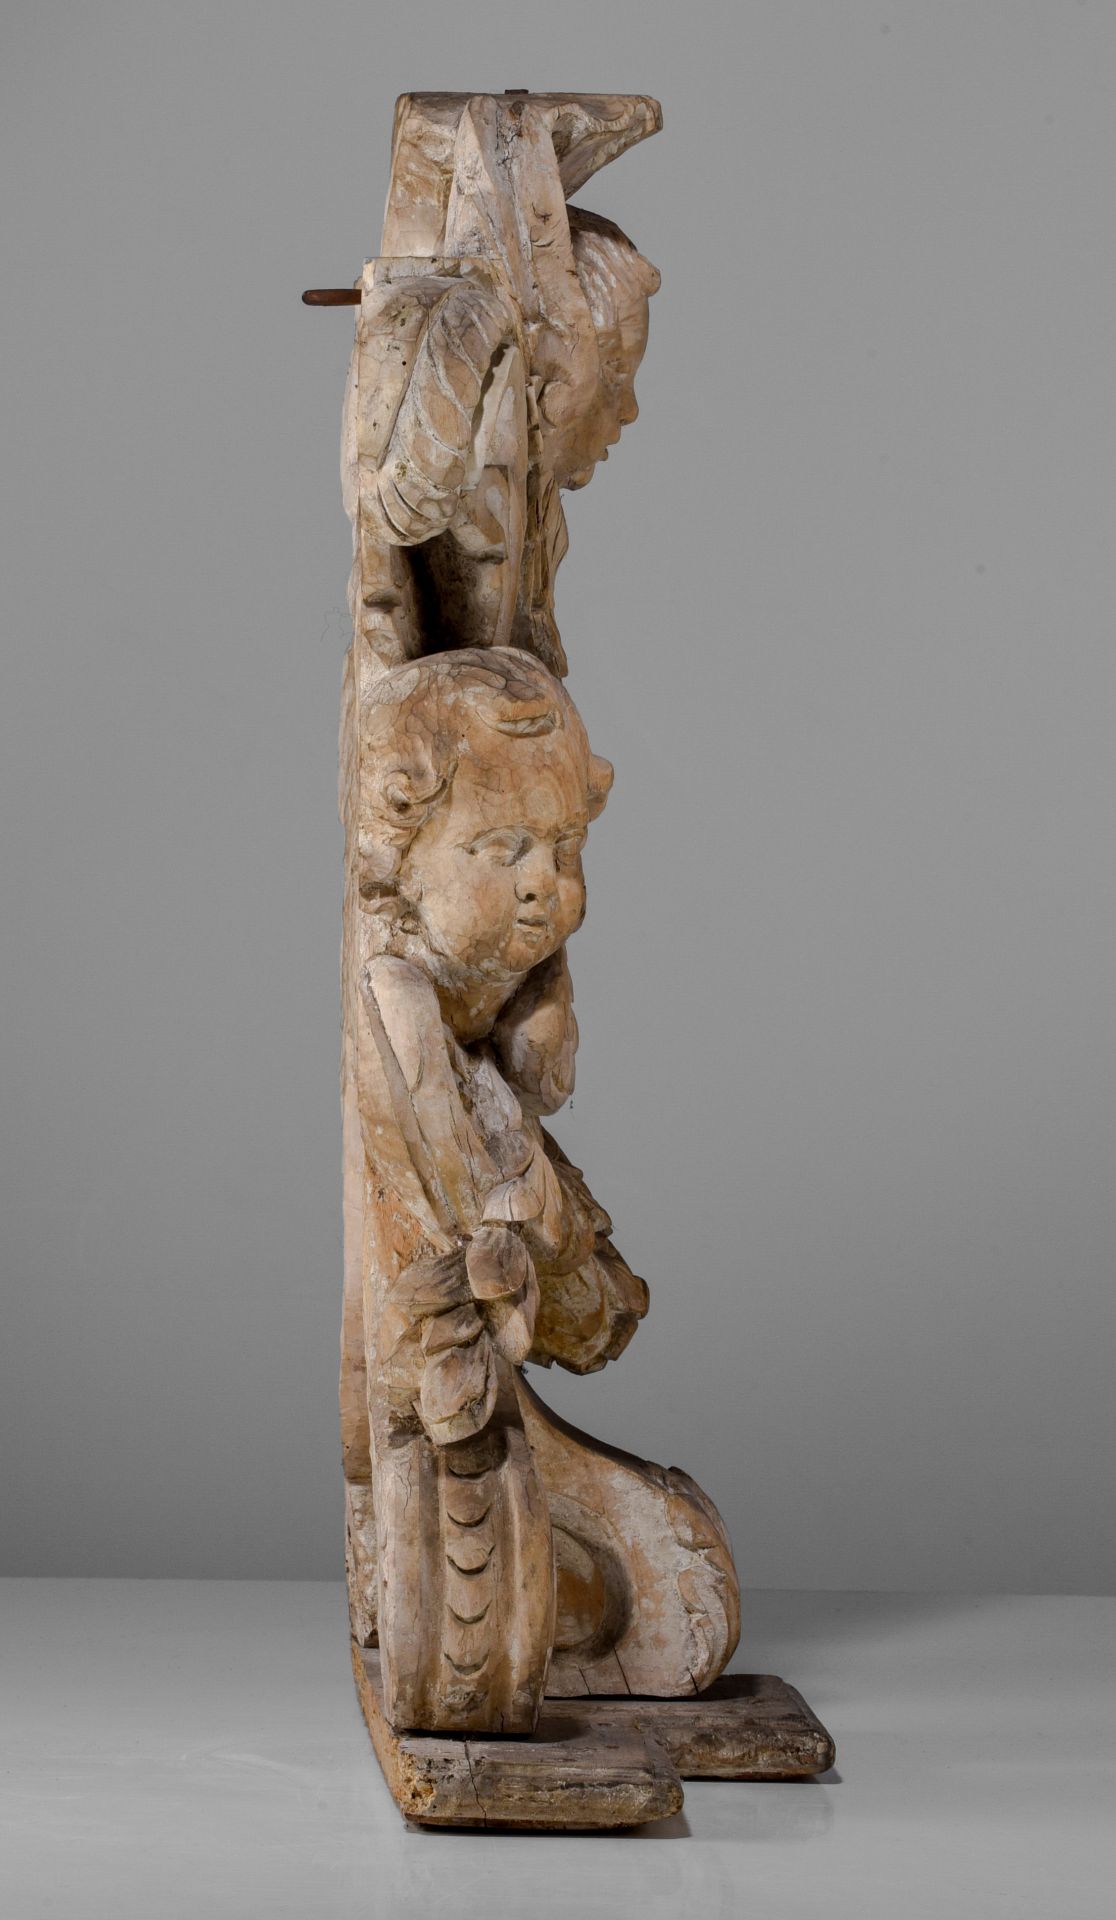 (BIDDING ONLY ON CARLOBONTE.BE) A Baroque richly carved limewood crucifix stand, H 56 cm - Image 6 of 10